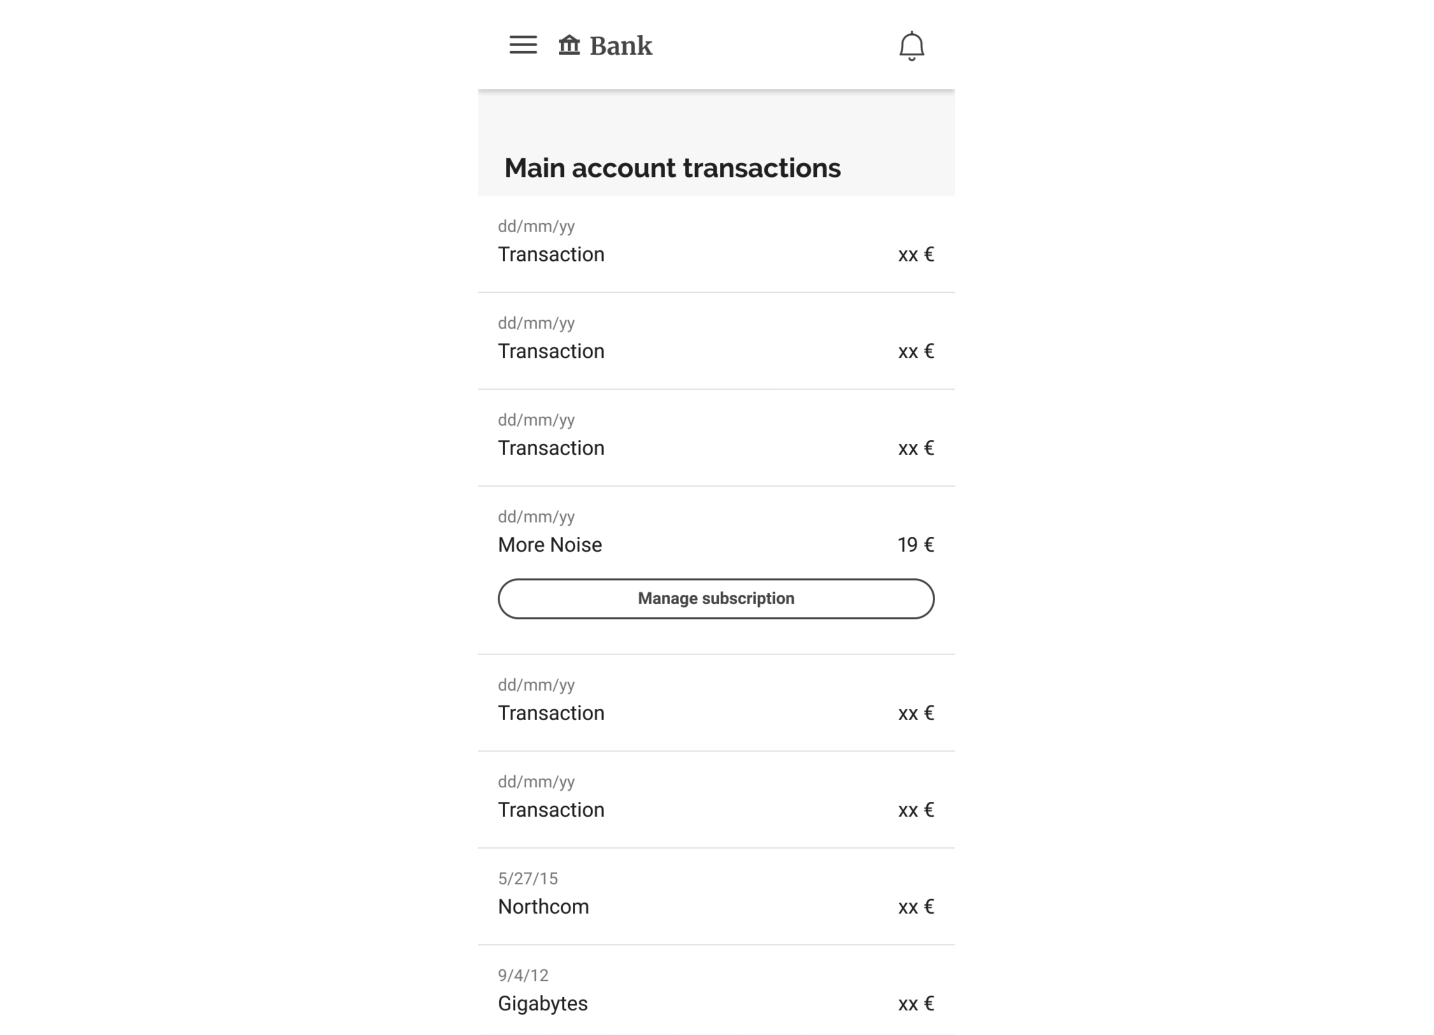 Manage subscription on transaction